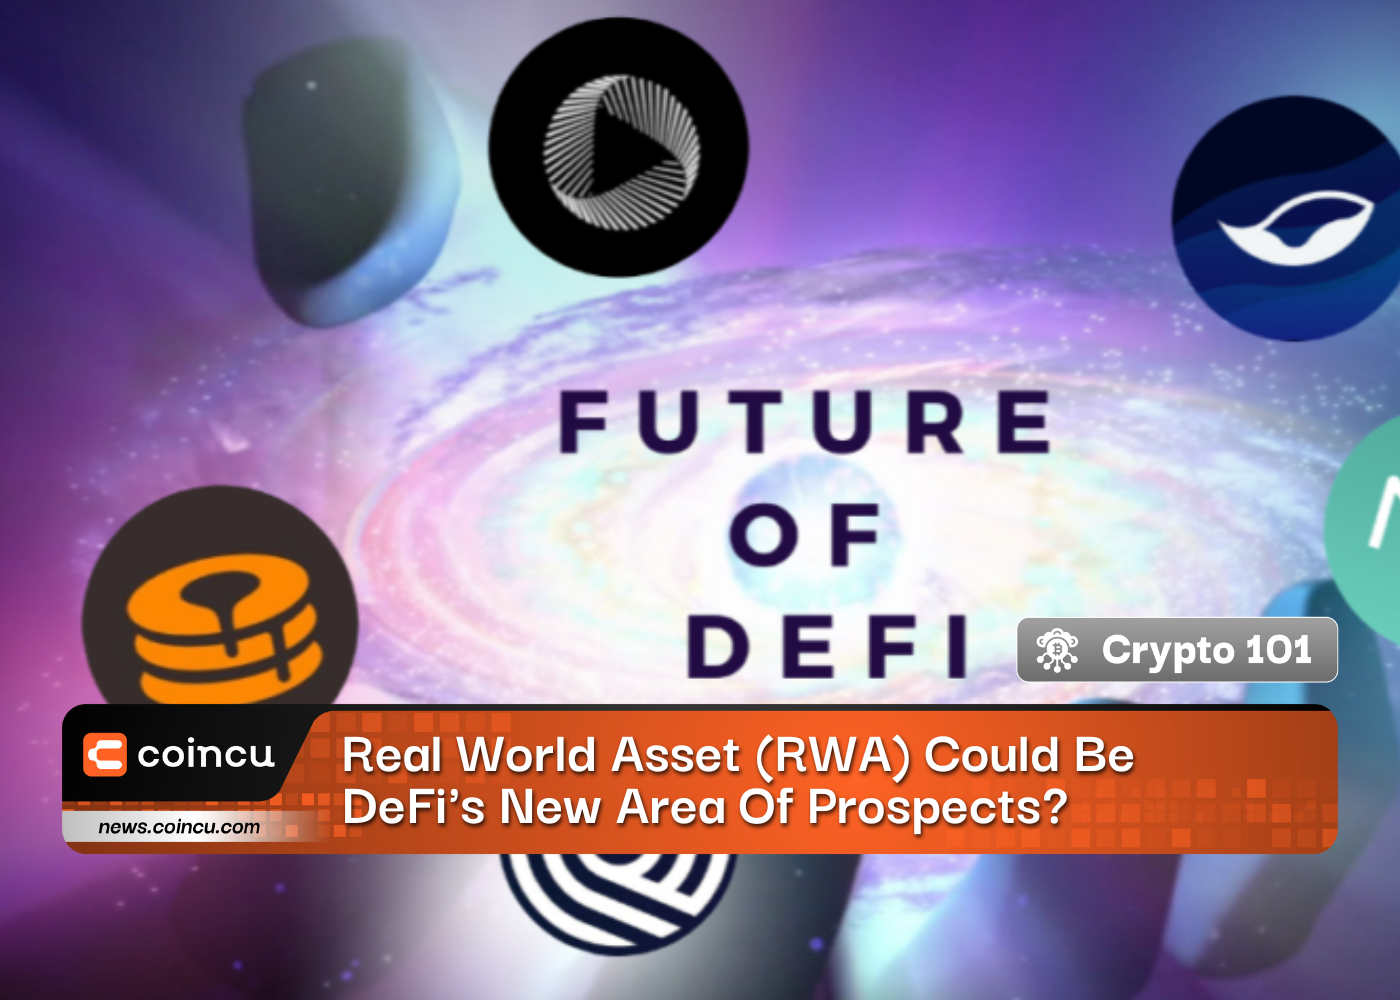 Real World Asset (RWA) Could Be DeFi's New Area Of Prospects?